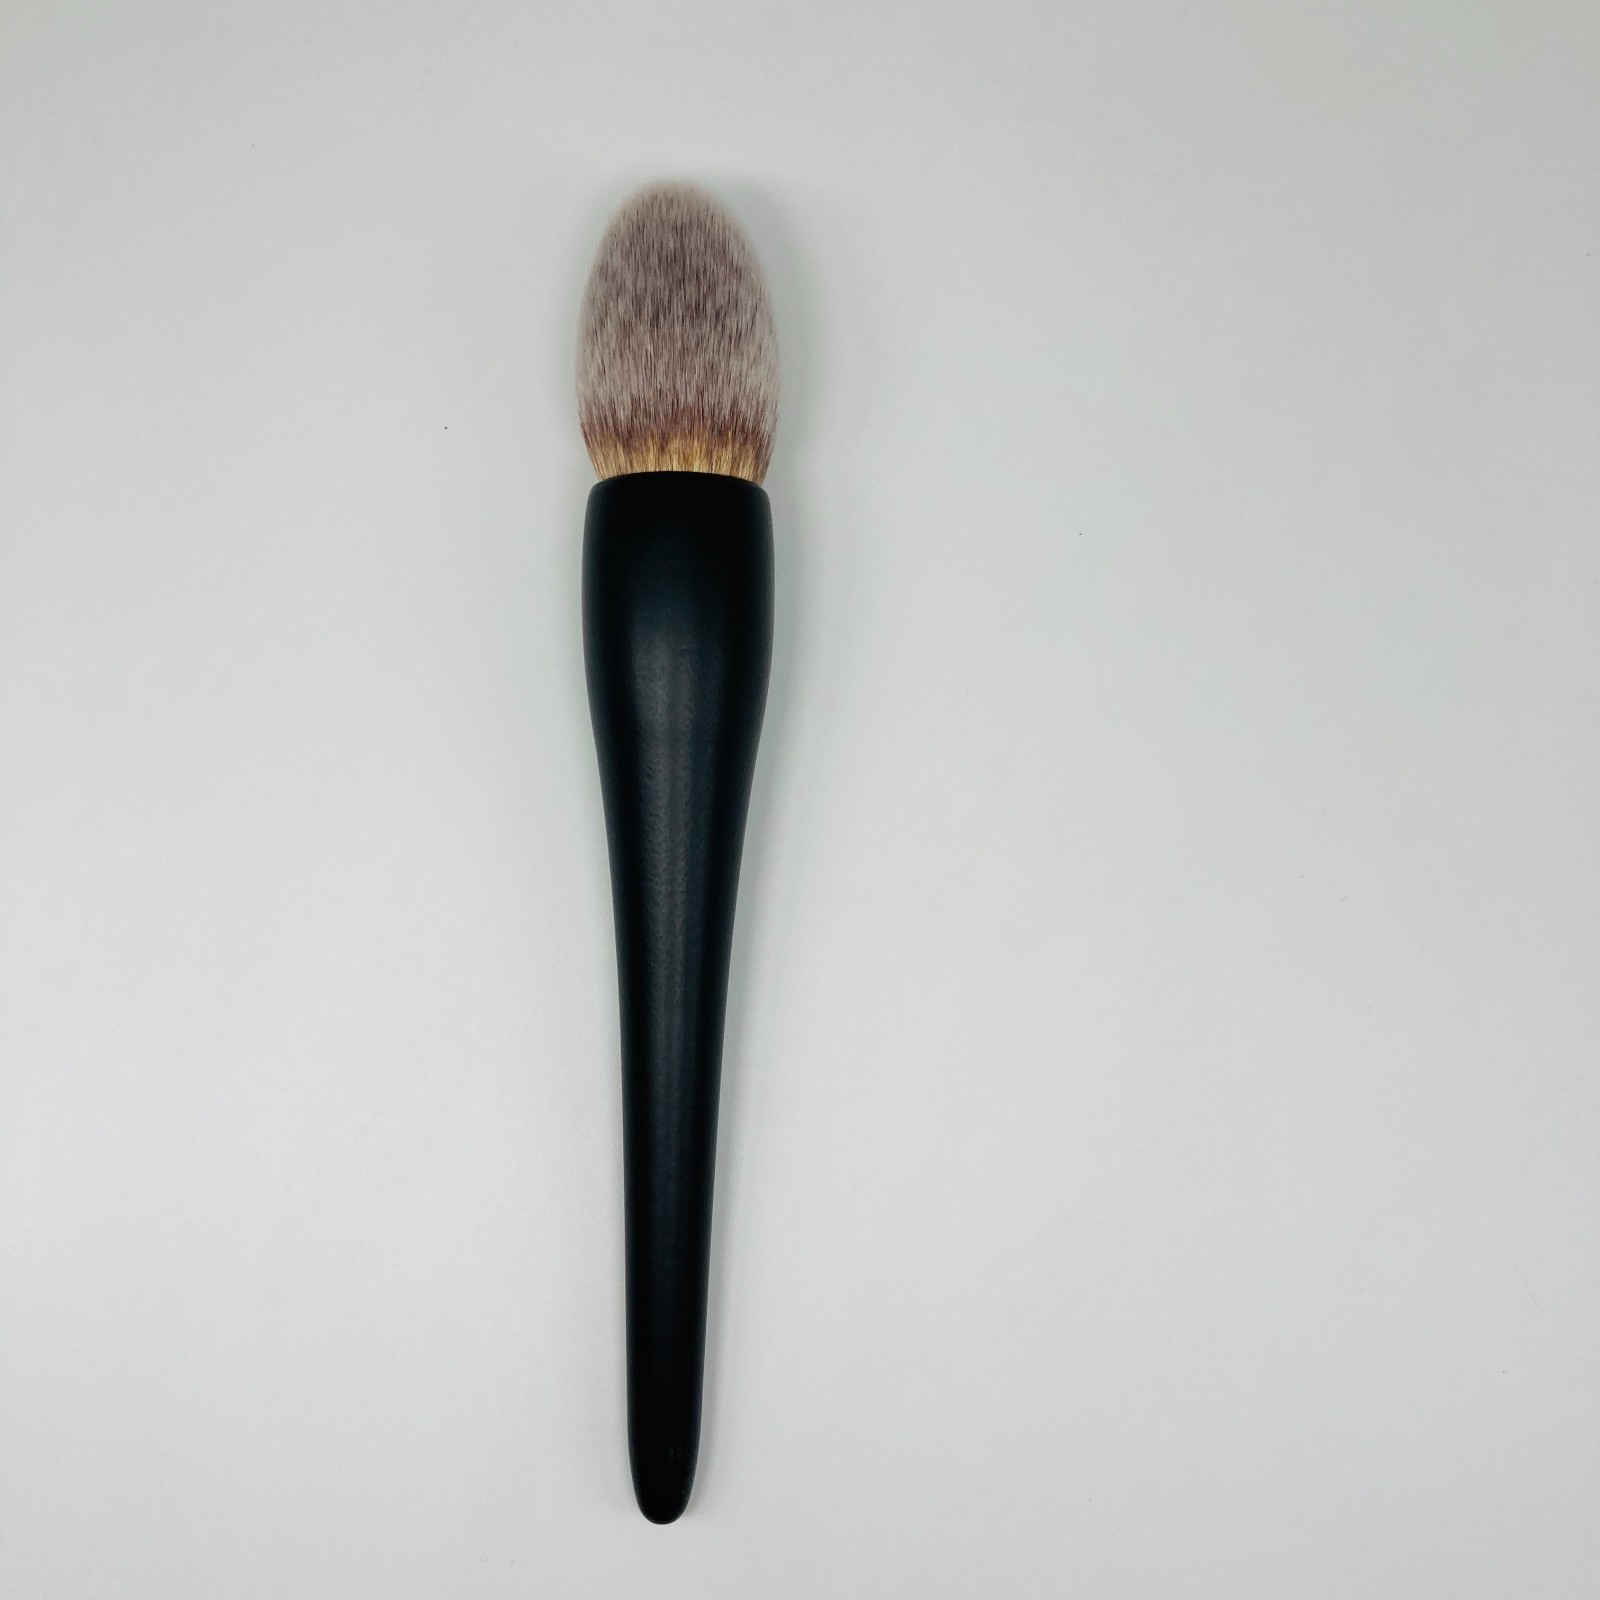 Suprabeauty full face makeup brushes from China for sale-1